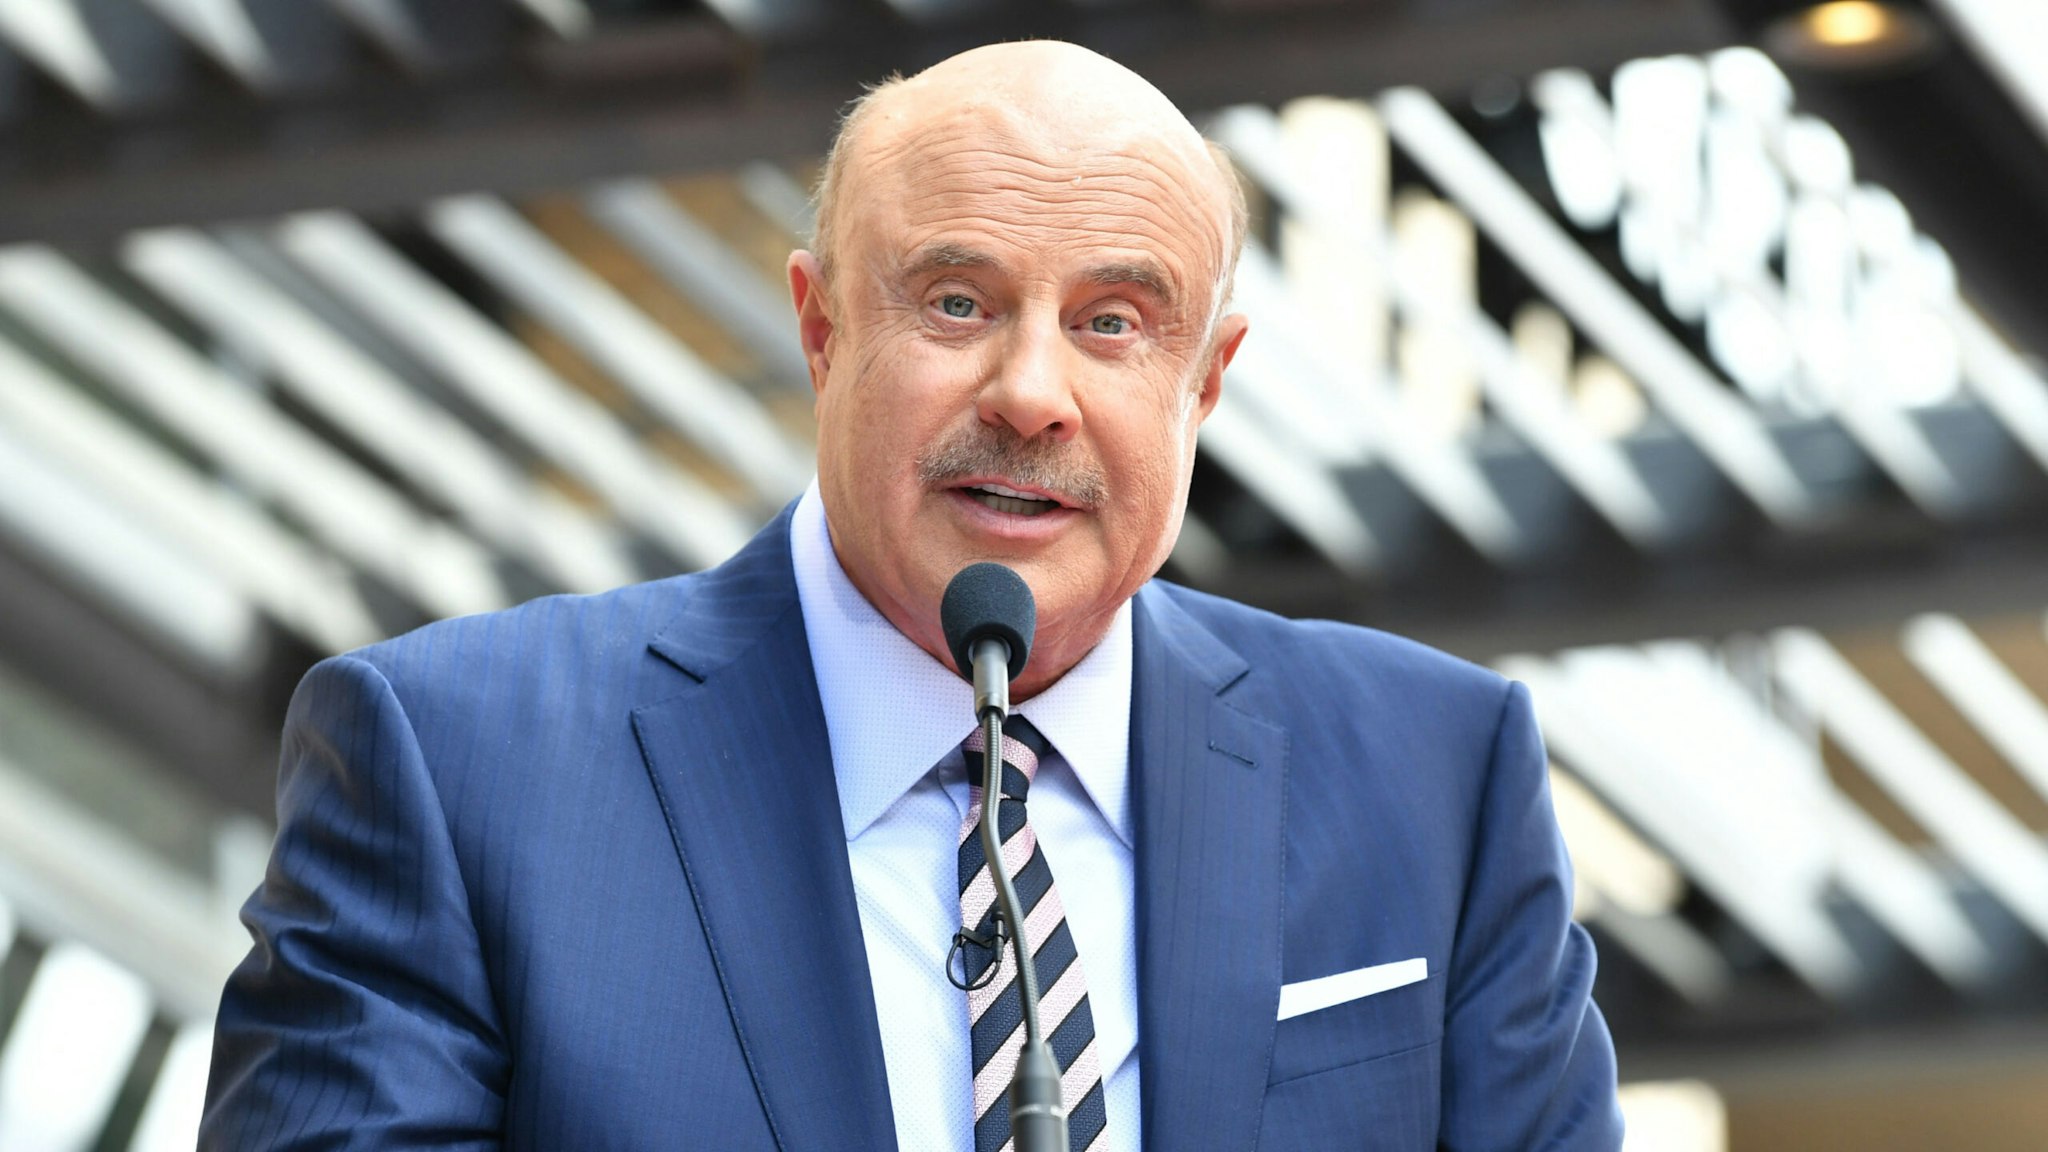 HOLLYWOOD, CALIFORNIA - FEBRUARY 21: Dr. Phil McGraw speaks at the ceremony honoring Dr. him with a star on The Hollywood Walk Of Fame on February 21, 2020 in Hollywood, California.